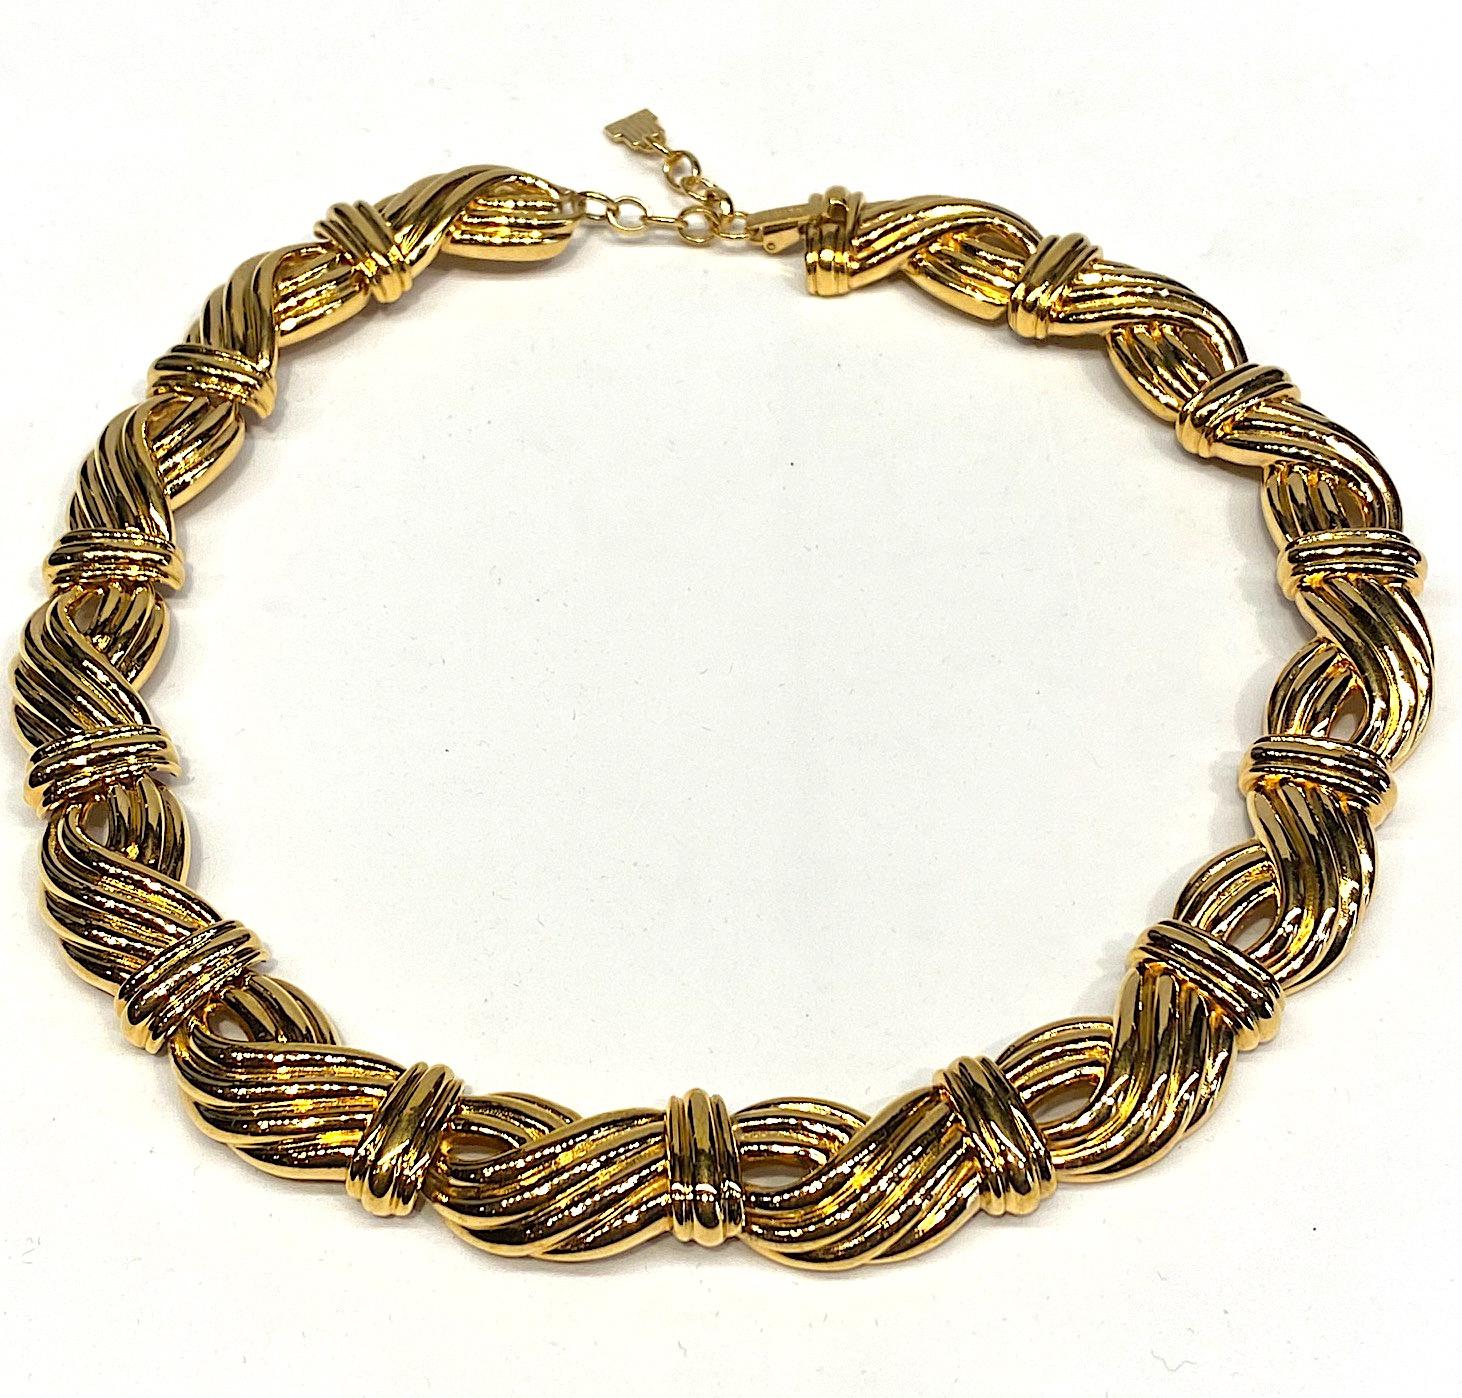 A classic and elegant ribbed link gold tone necklace by Lanvin from the 1980s and produced by Grosse of Germany. The necklace is comprised of 14 ribbed links 1.5 inches long and .75 of an inch wide. Additionally, there is a 1.5 inch long extender